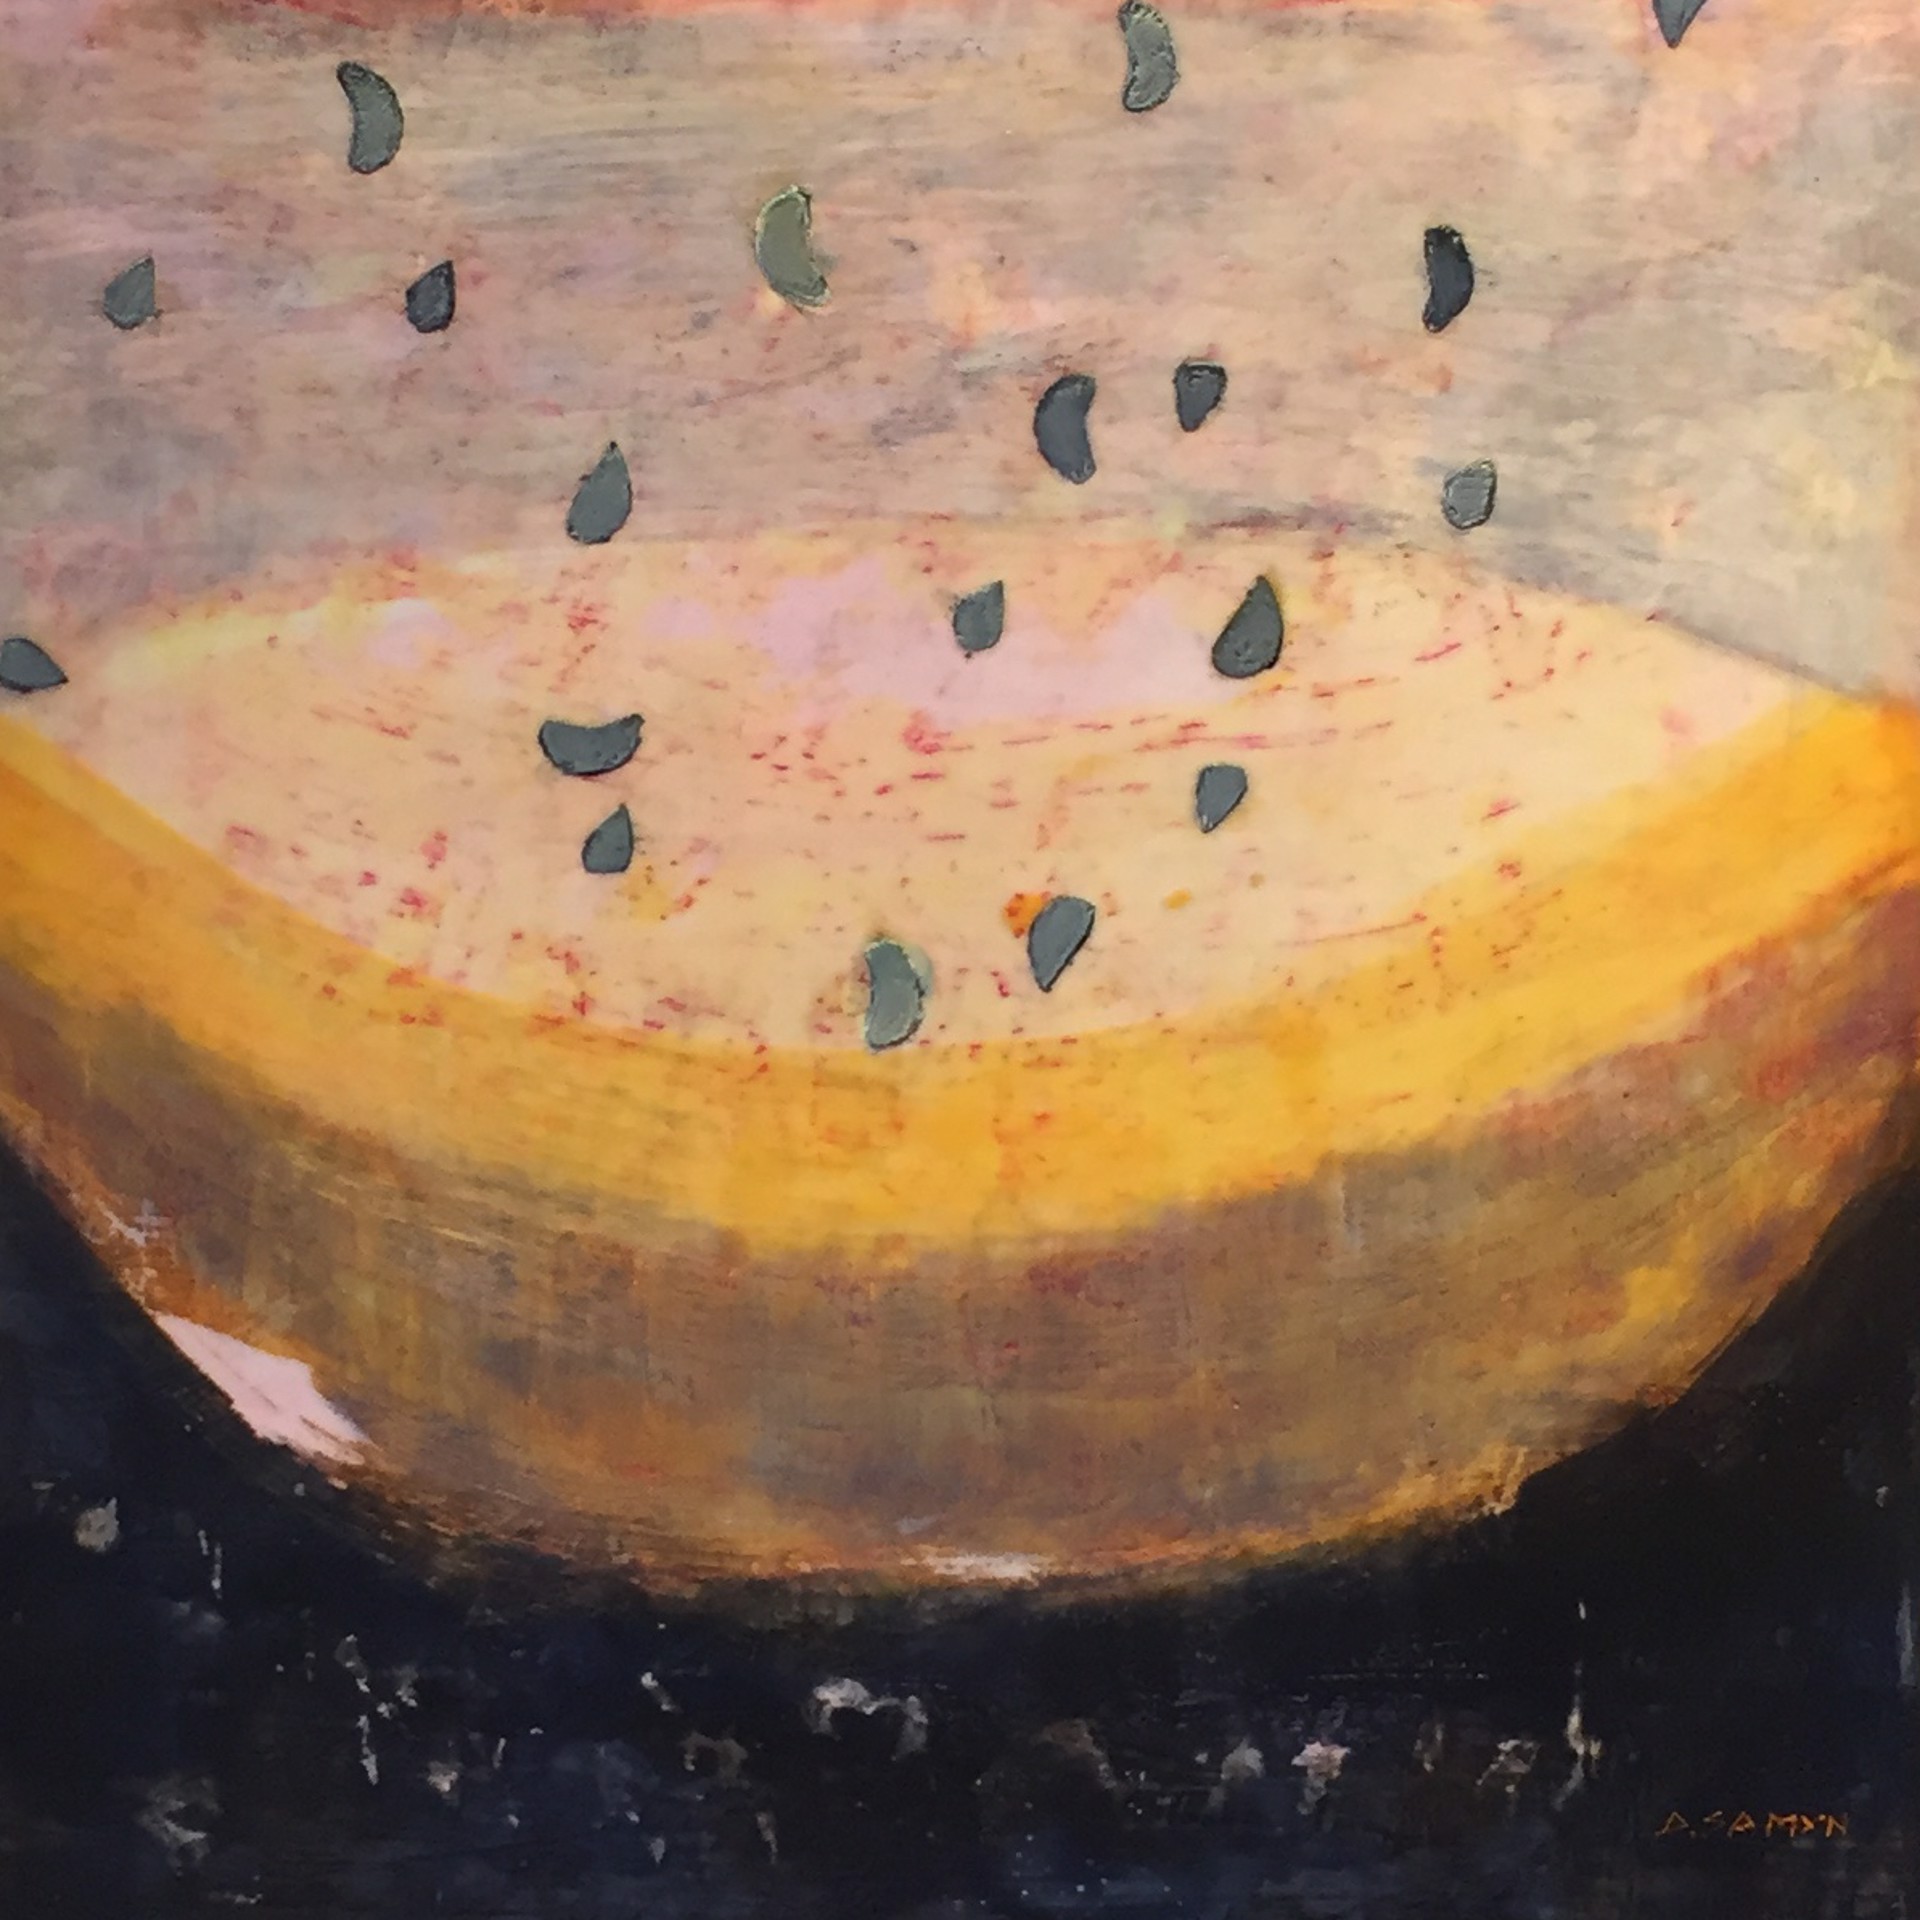 Seed of Change by Dominique Samyn